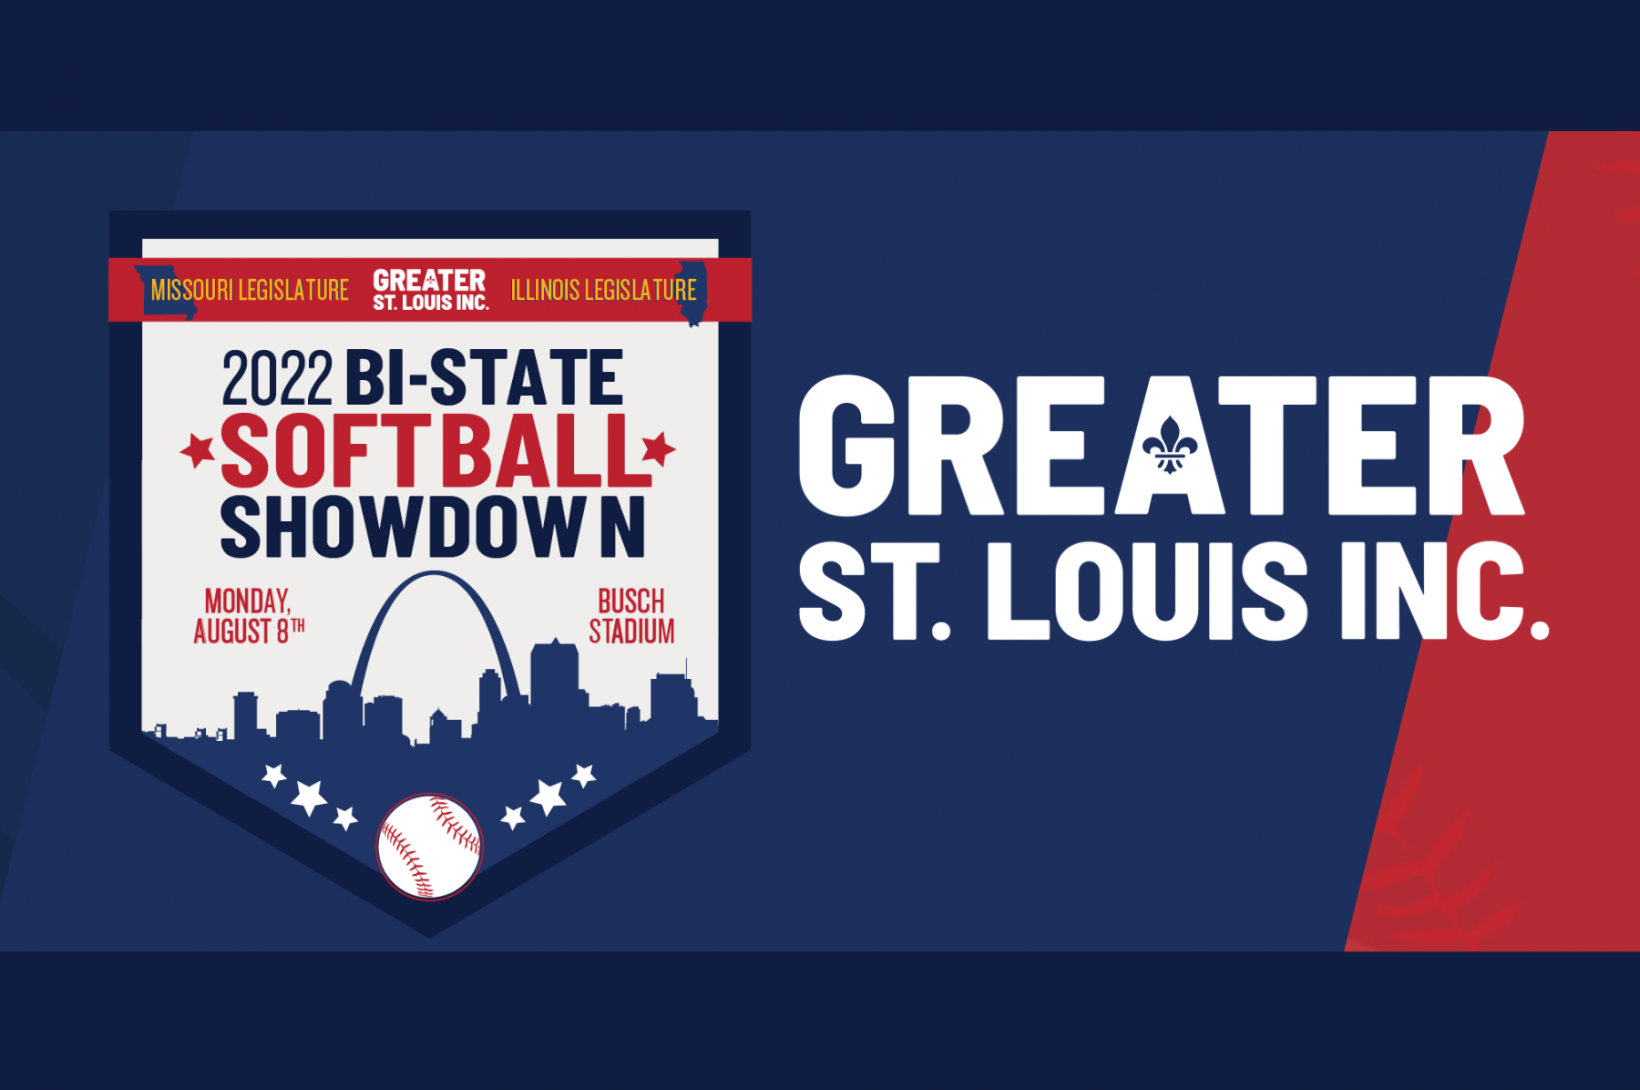 2022 Bi-State Softball Showdown graphic next to Greater St. Louis, Inc. graphic.